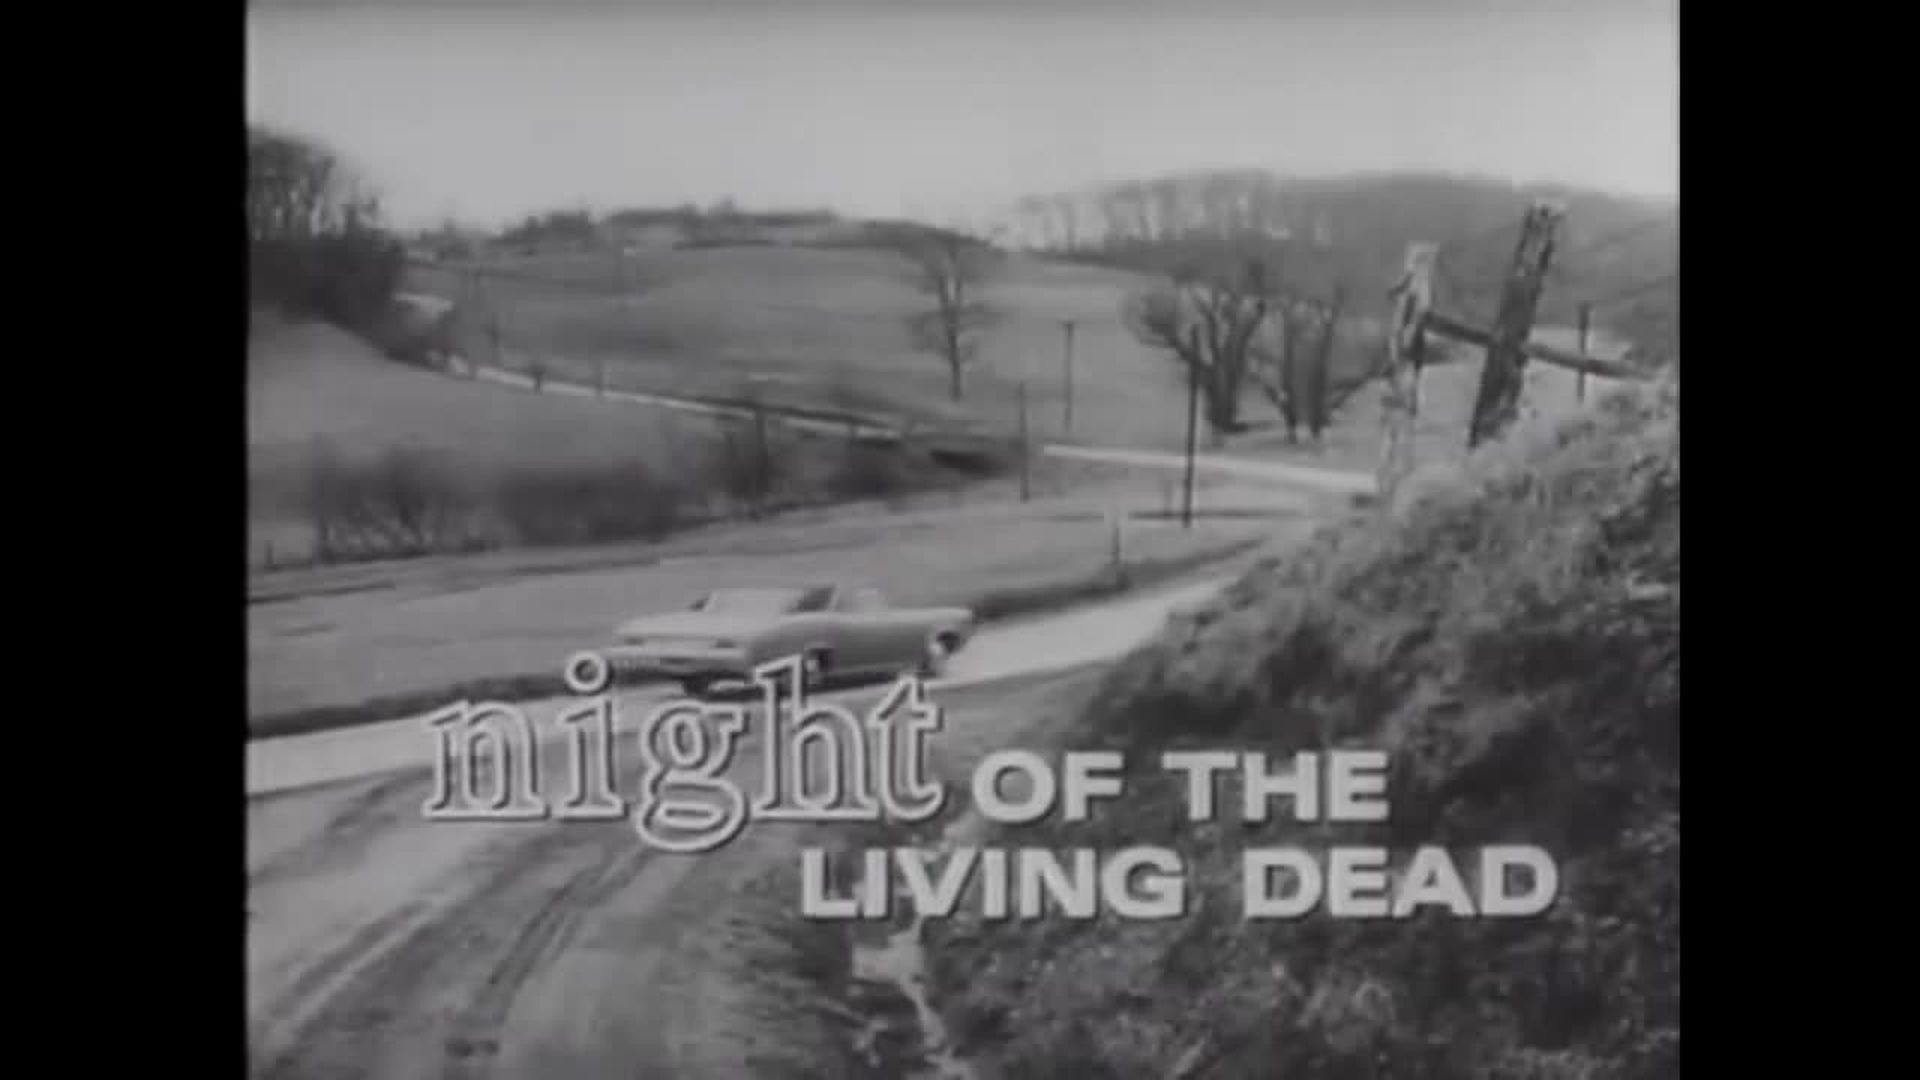 Night of the Living Dead 